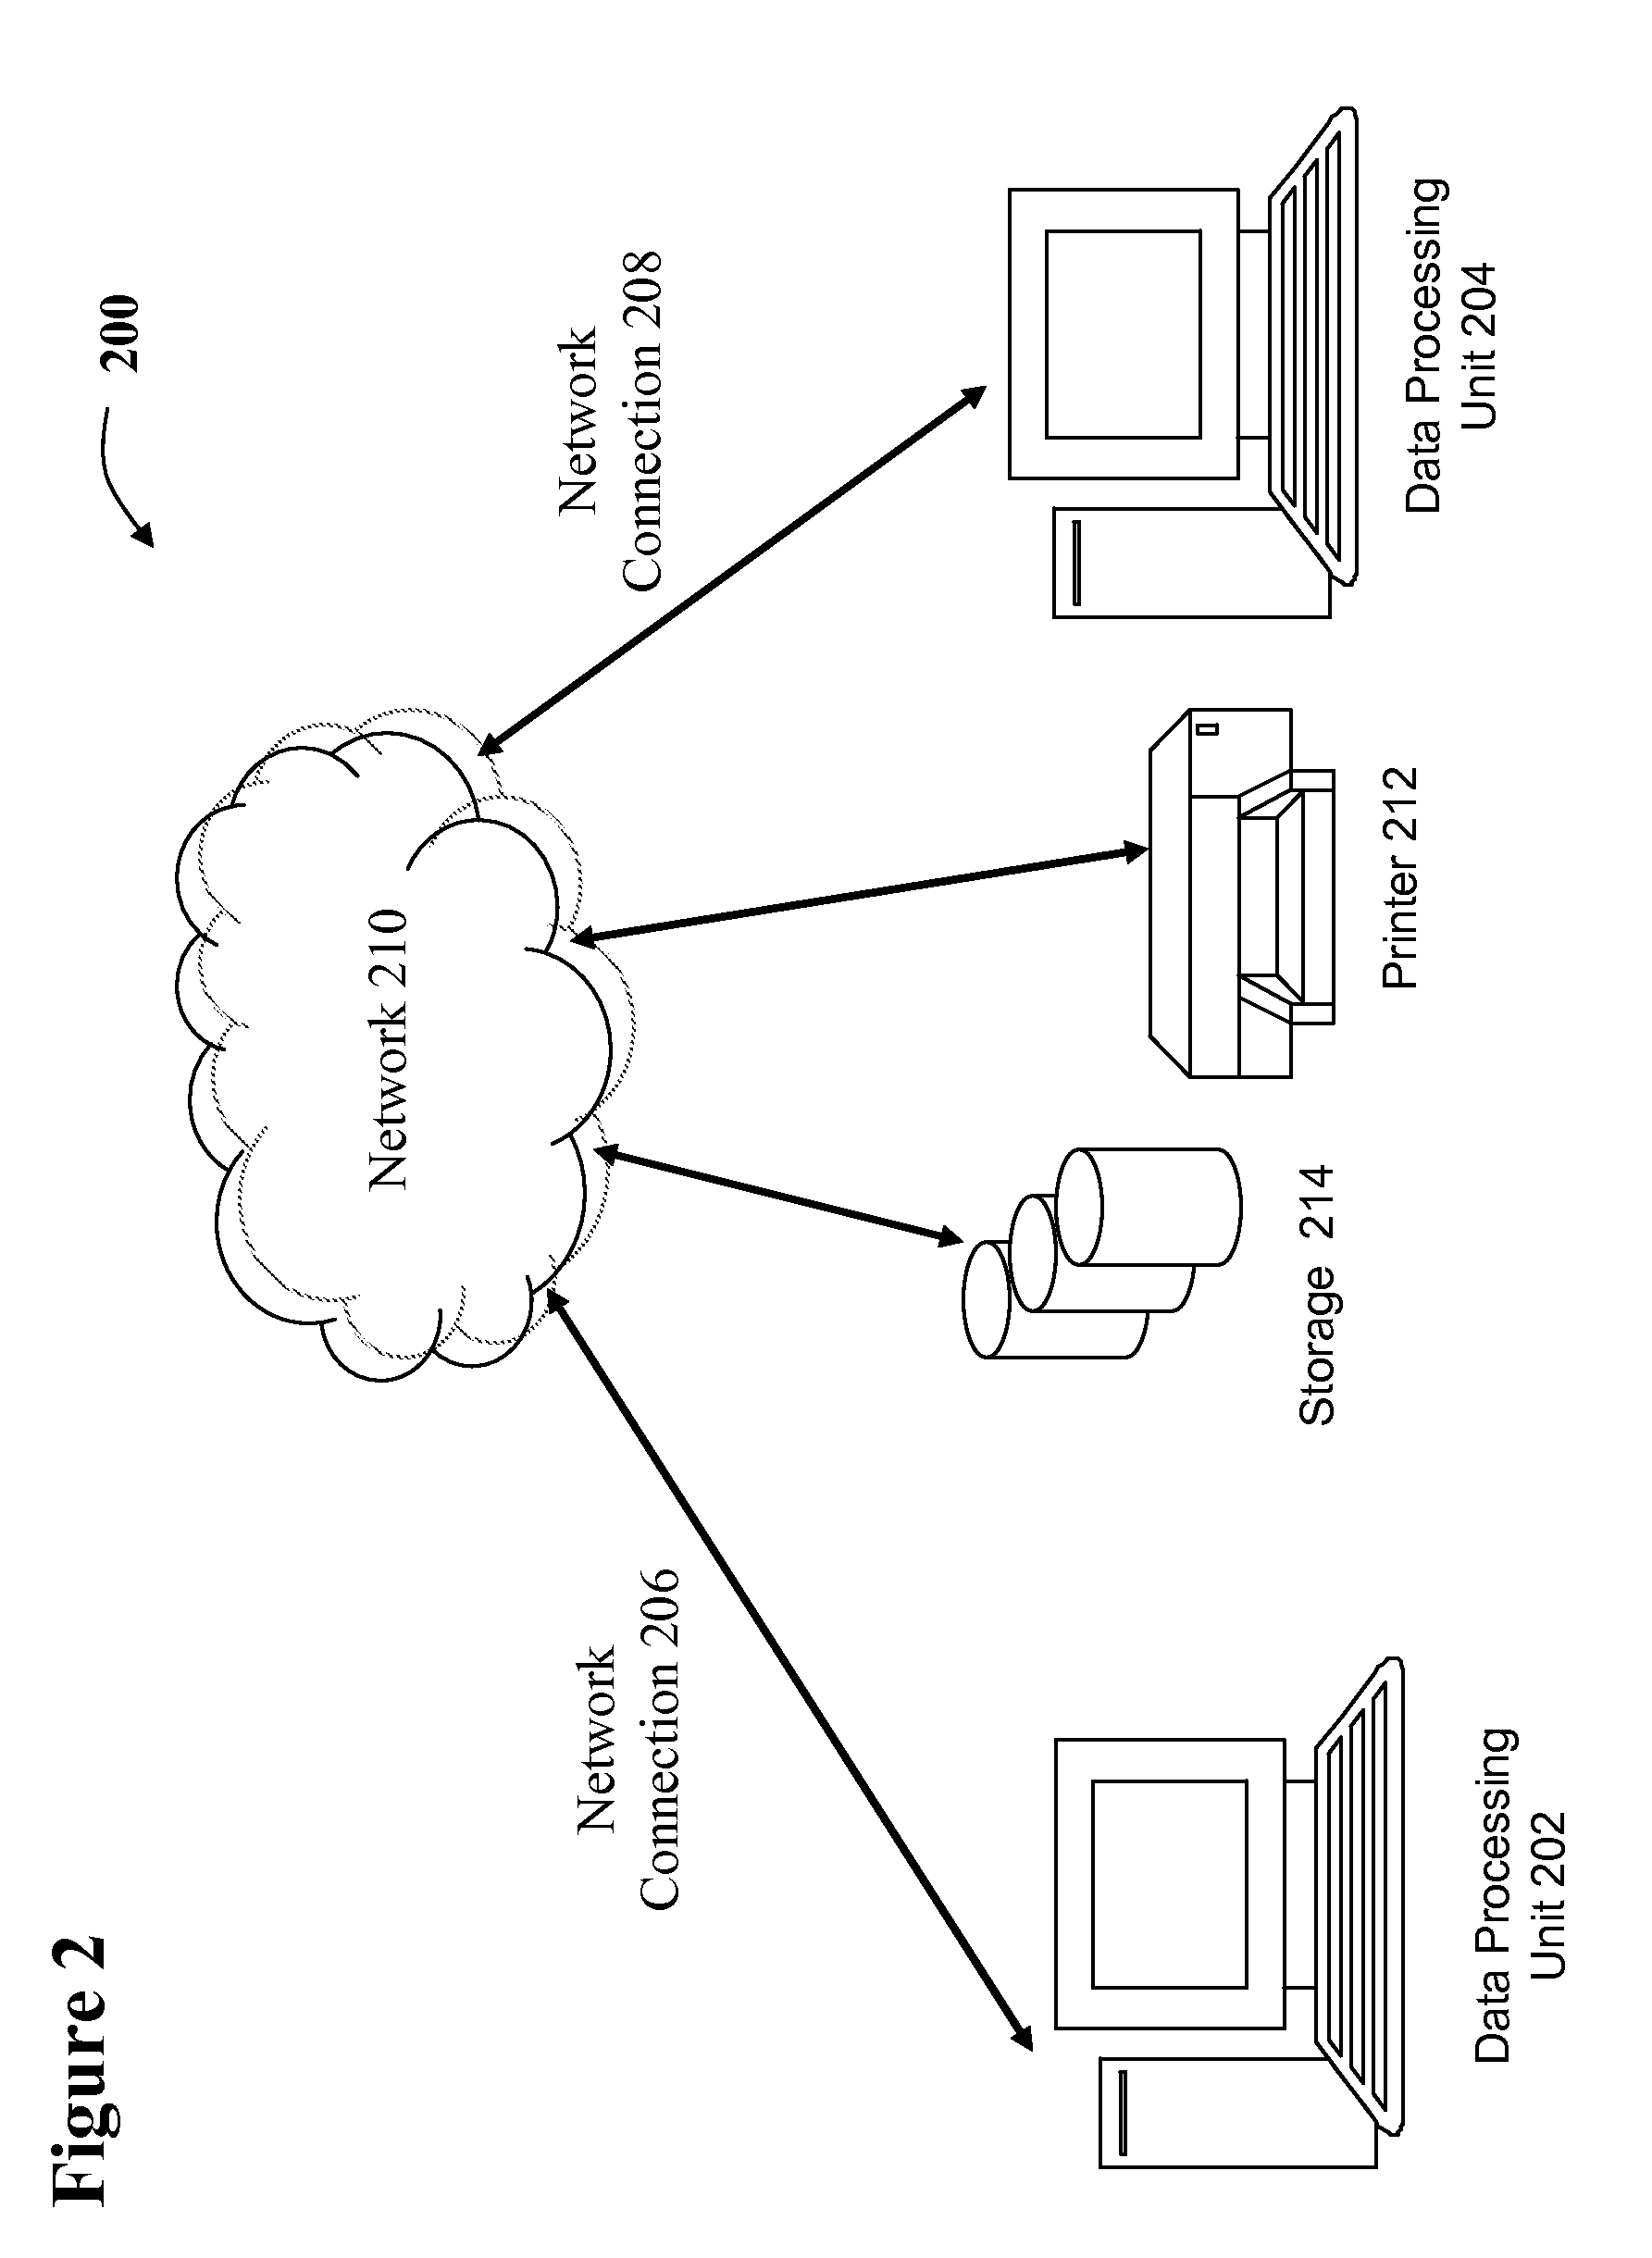 System and method for managing virtual world environments based upon existing physical environments